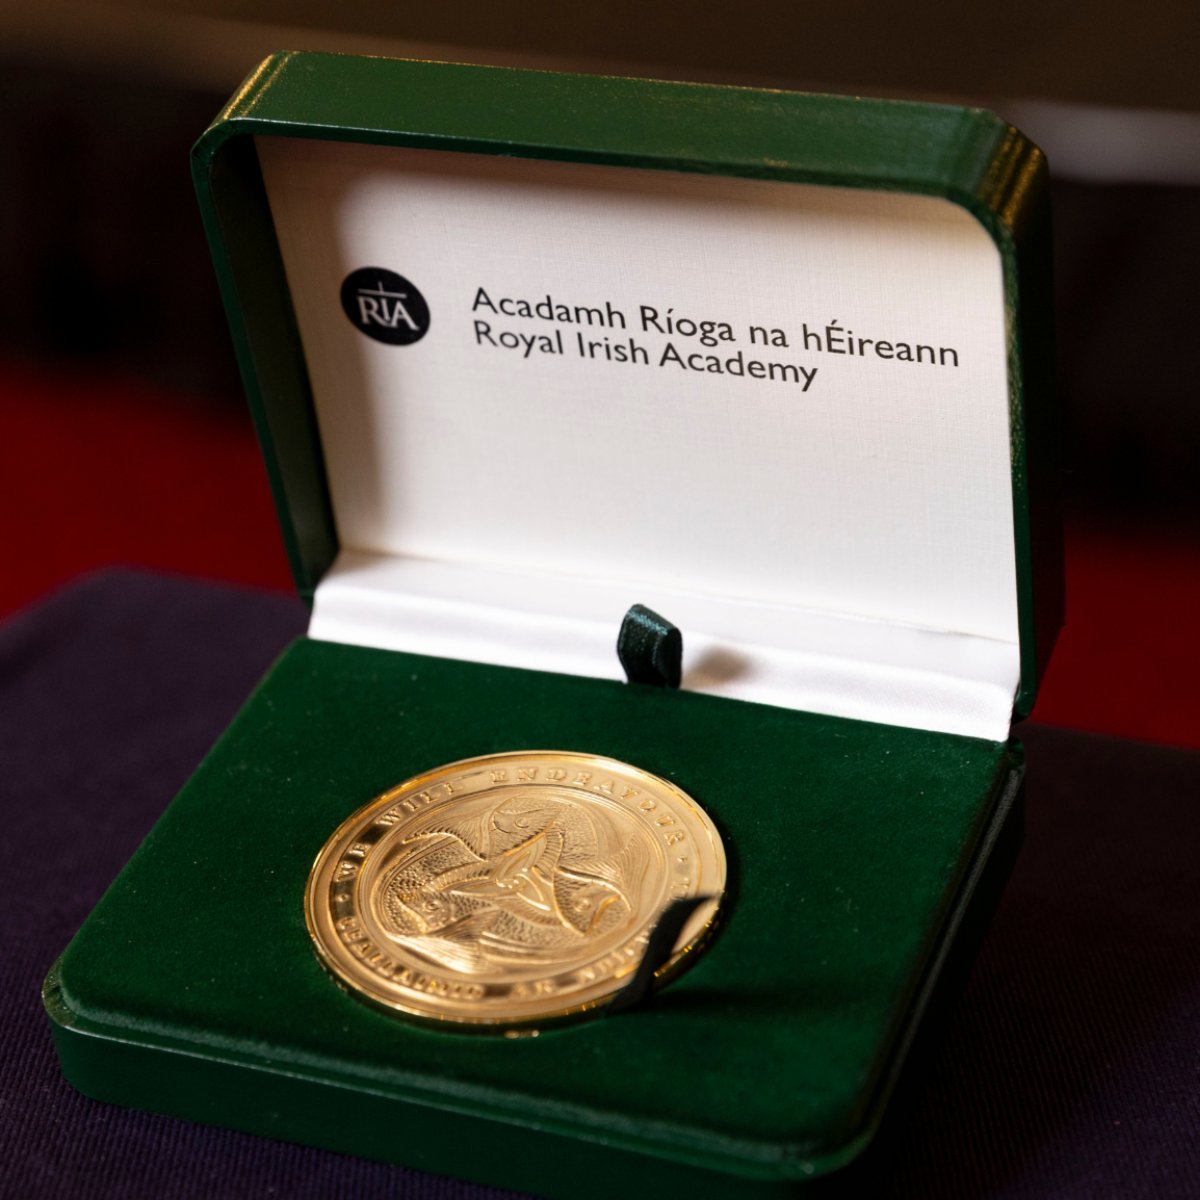 In 2025, two #RIAGoldMedals will be awarded: one in the Humanities & one in the Life & Medical Sciences to recognise world-class researchers in Ireland making a global impact. The call for nominations is open until 4 June 2024. See criteria & apply: bit.ly/2025RIAGoldMed…